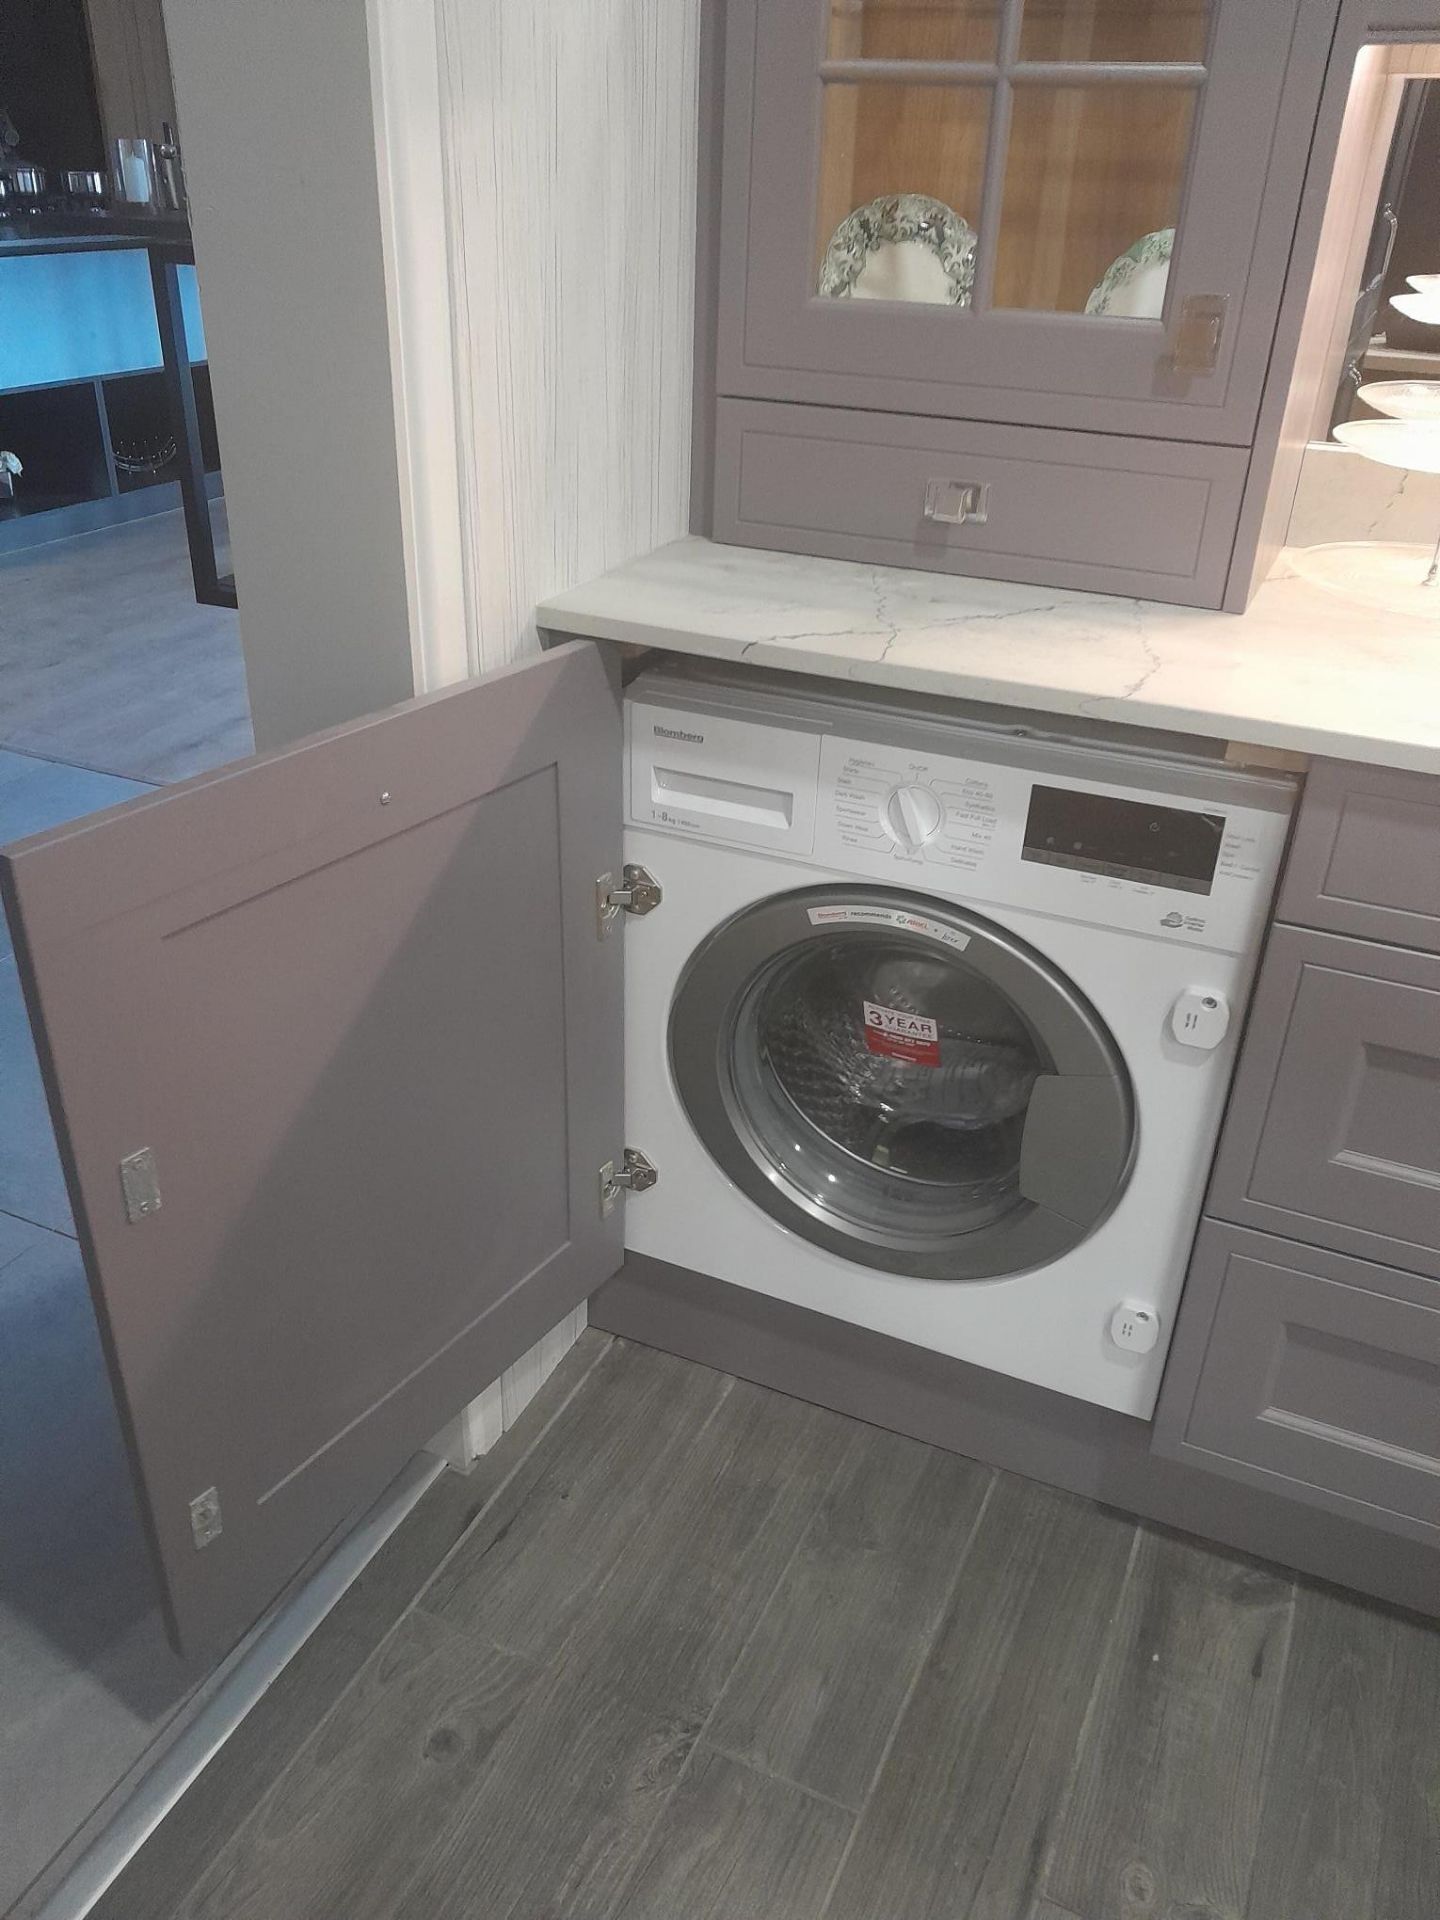 Lilac traditional English shaker kitchen to include Blomberg LWI284410 integrated washing machine, - Bild 3 aus 5